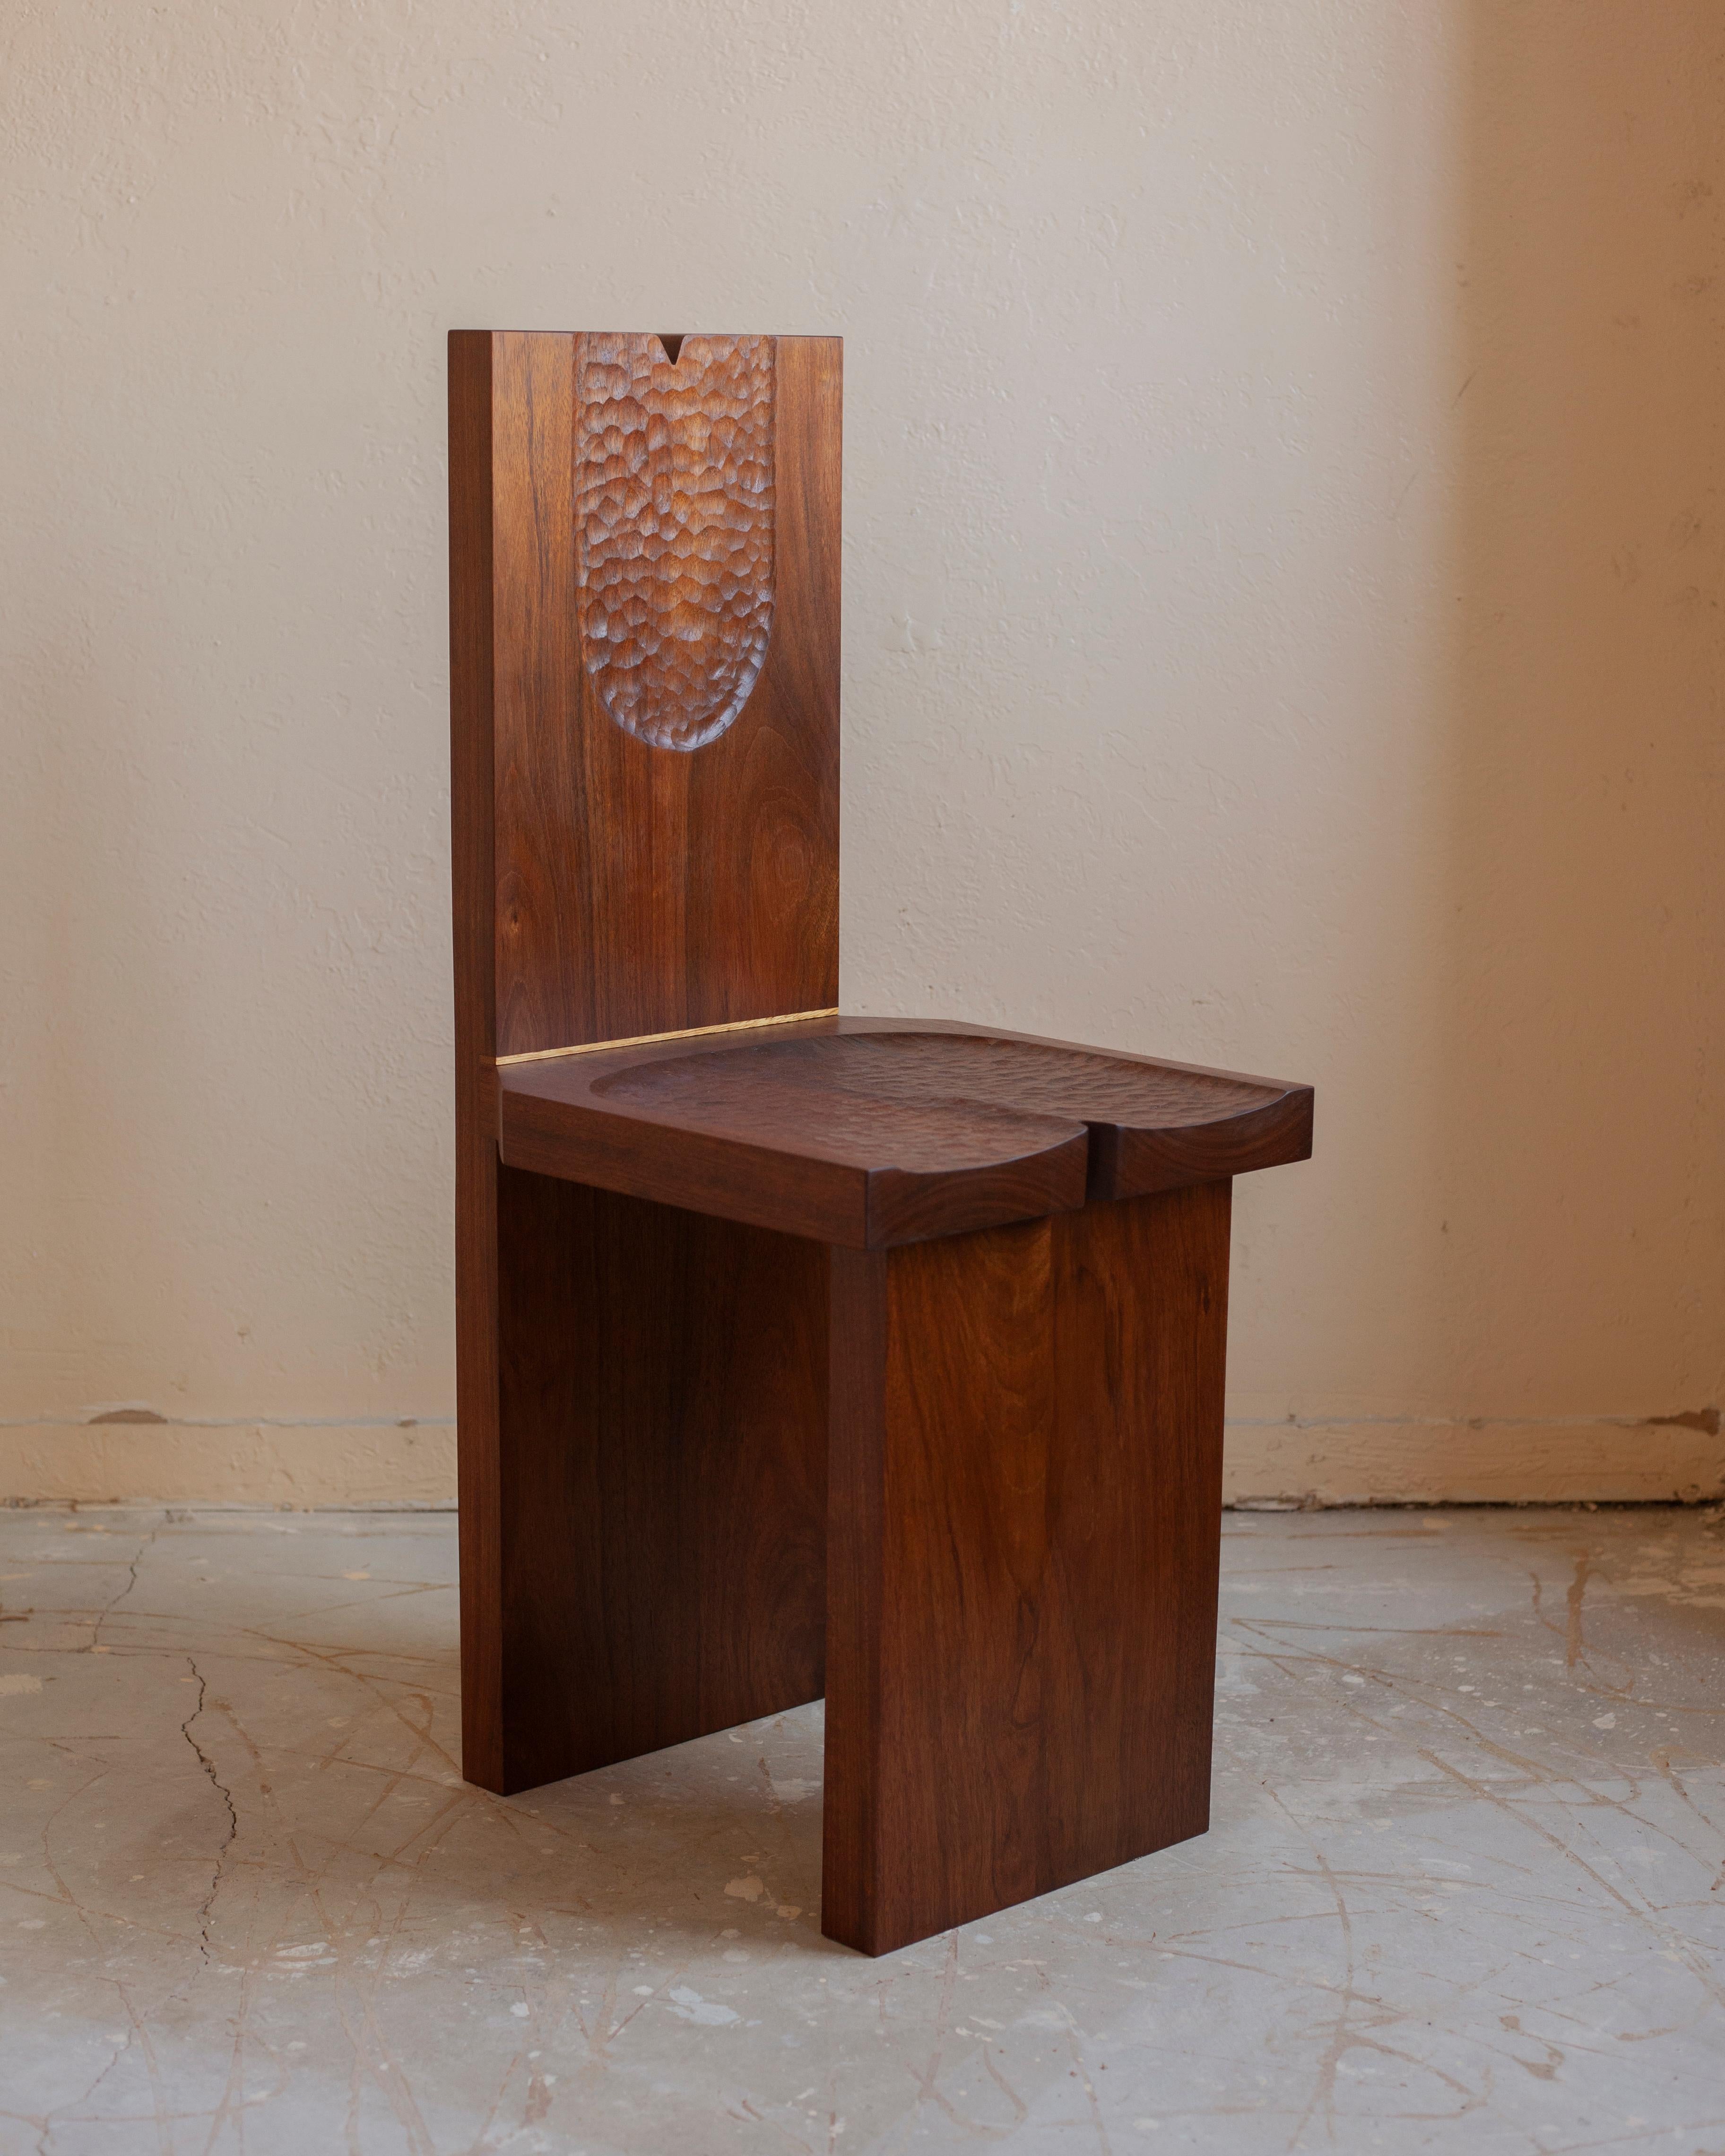 Hand-Carved chair in solid Shedua wood made by Roly Gomez of CFP. 

Edition of 10. 

Features both a hand-carved seat and backrest. 

Also features an Iroko wood inlay.